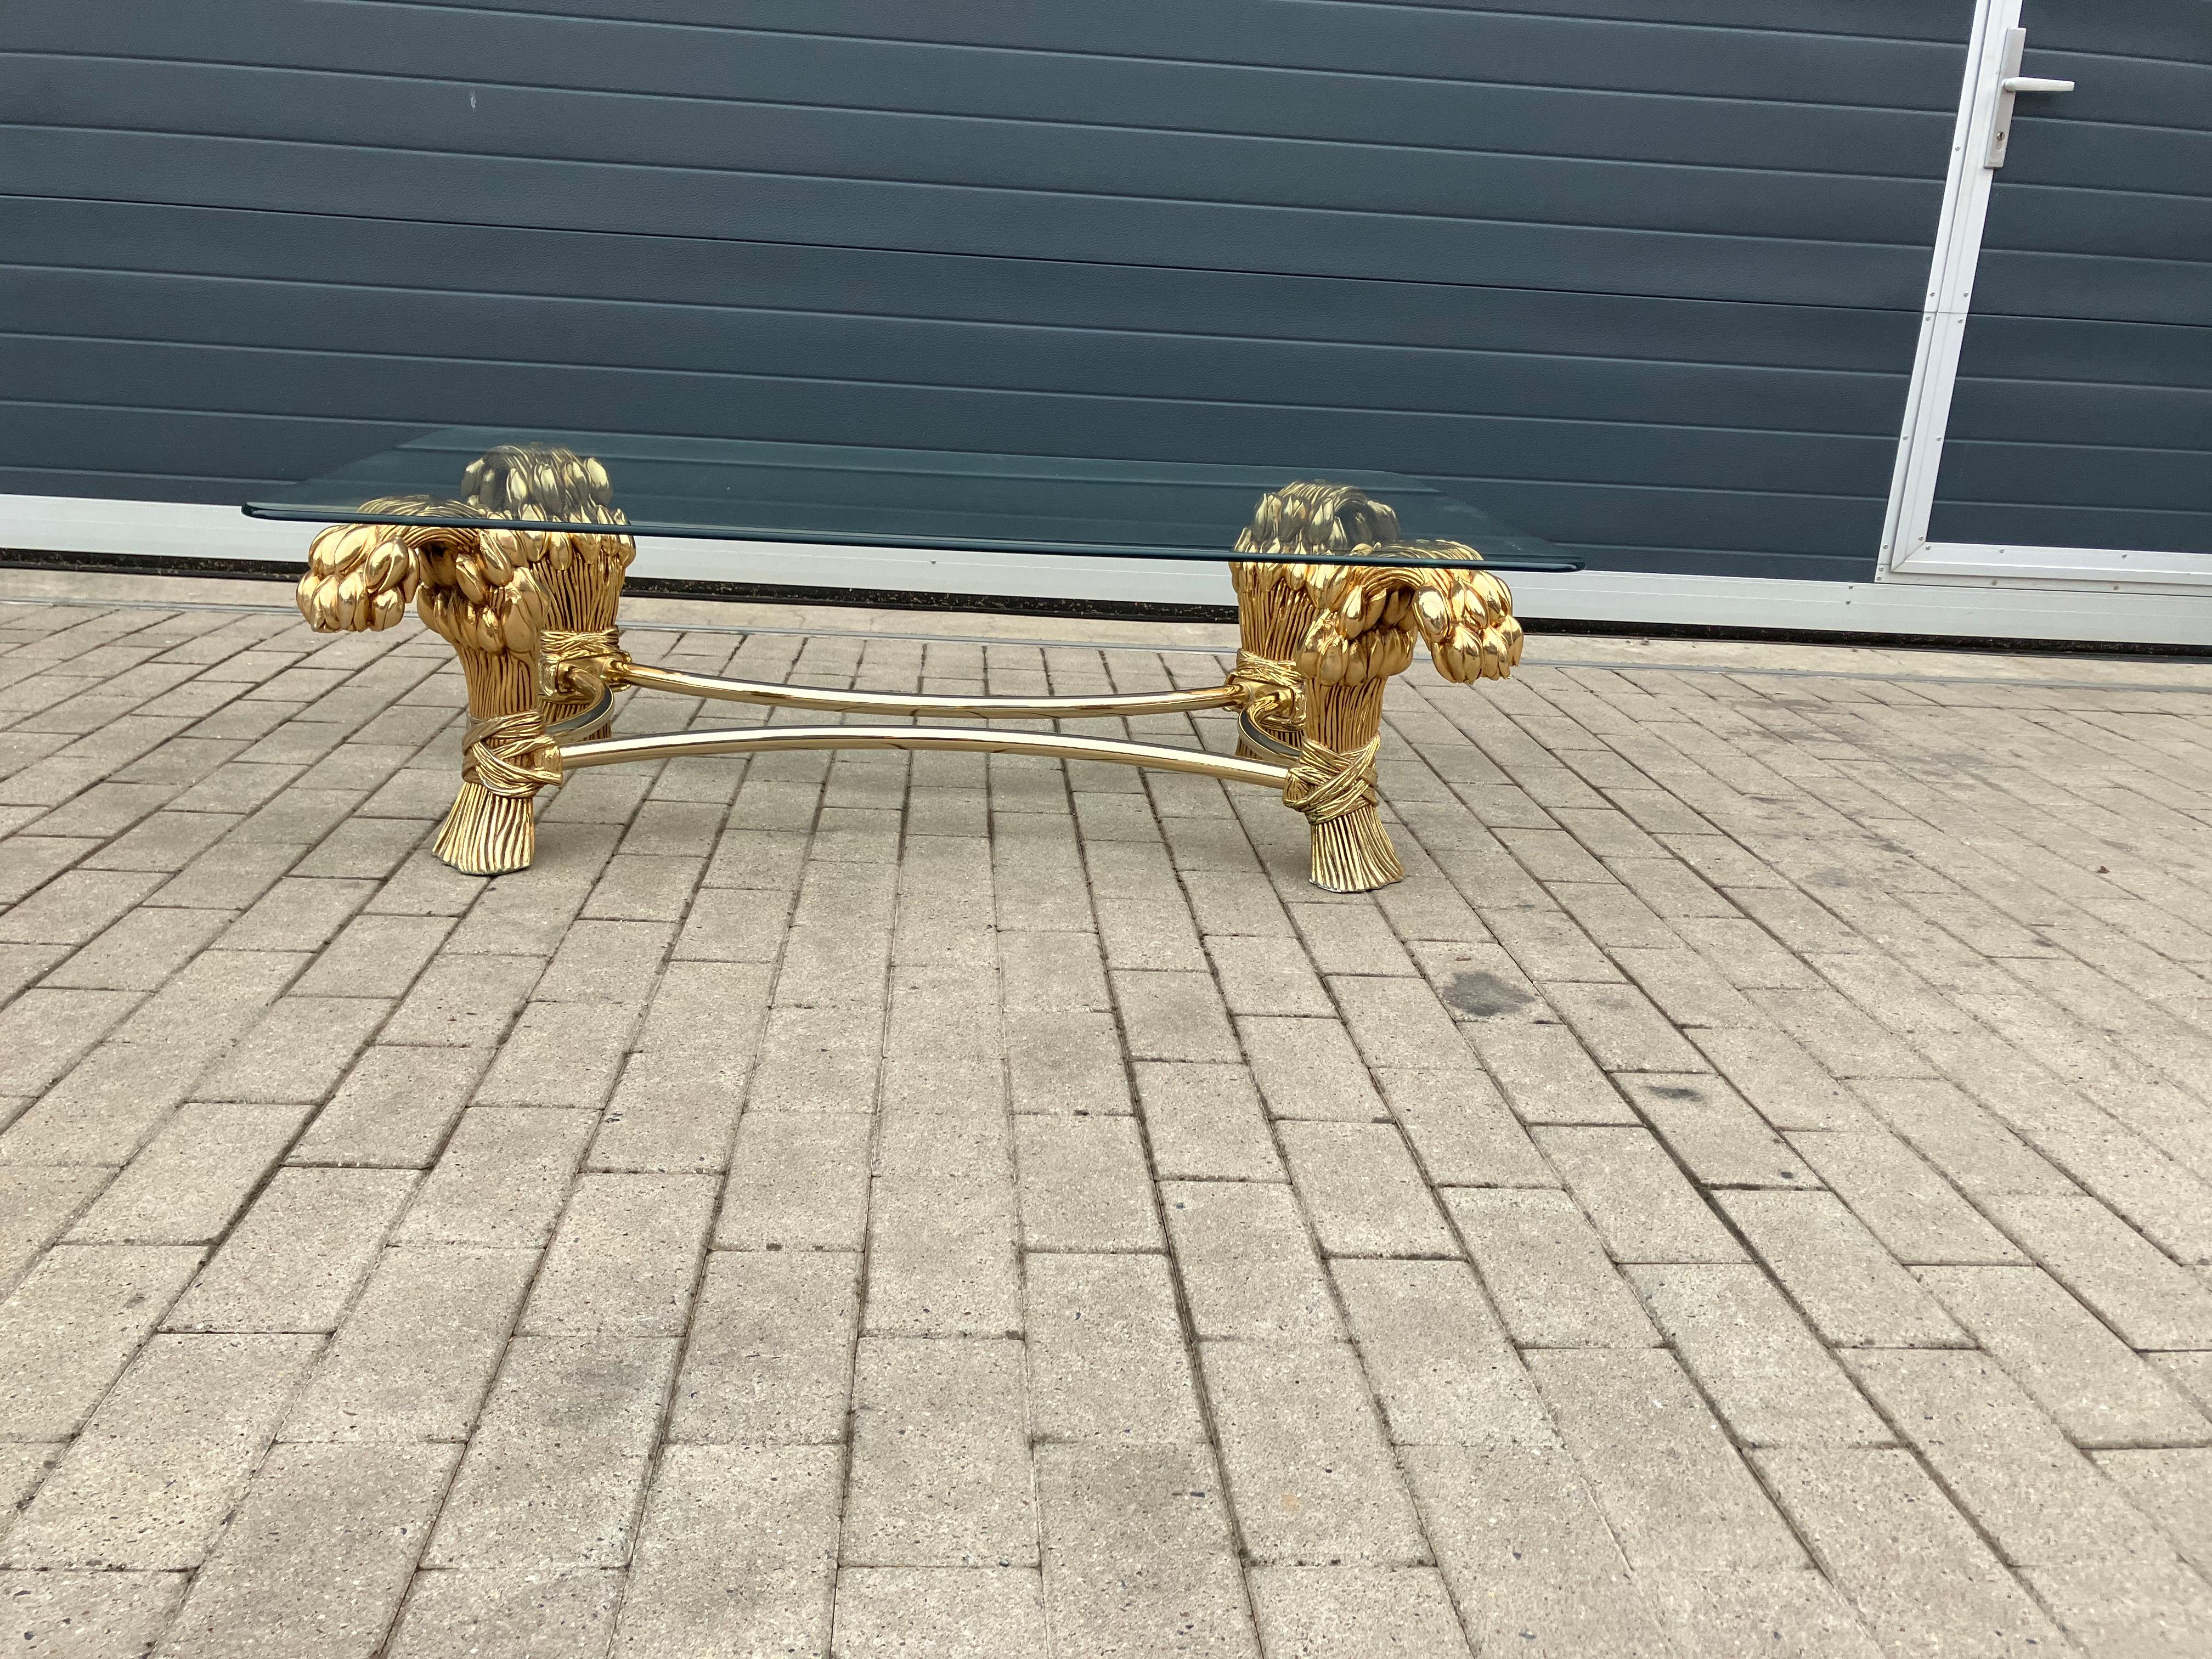 Magnificent Hollywood Regency Tulip (Flowers) Coffee Table from the 70’s by the famous Belgian artist Willy Daro (also well know for the Brass Bonsai tree Coffee Tables).

Brass Coffee Table with a glass top.
In beautiful vintage condition!
A